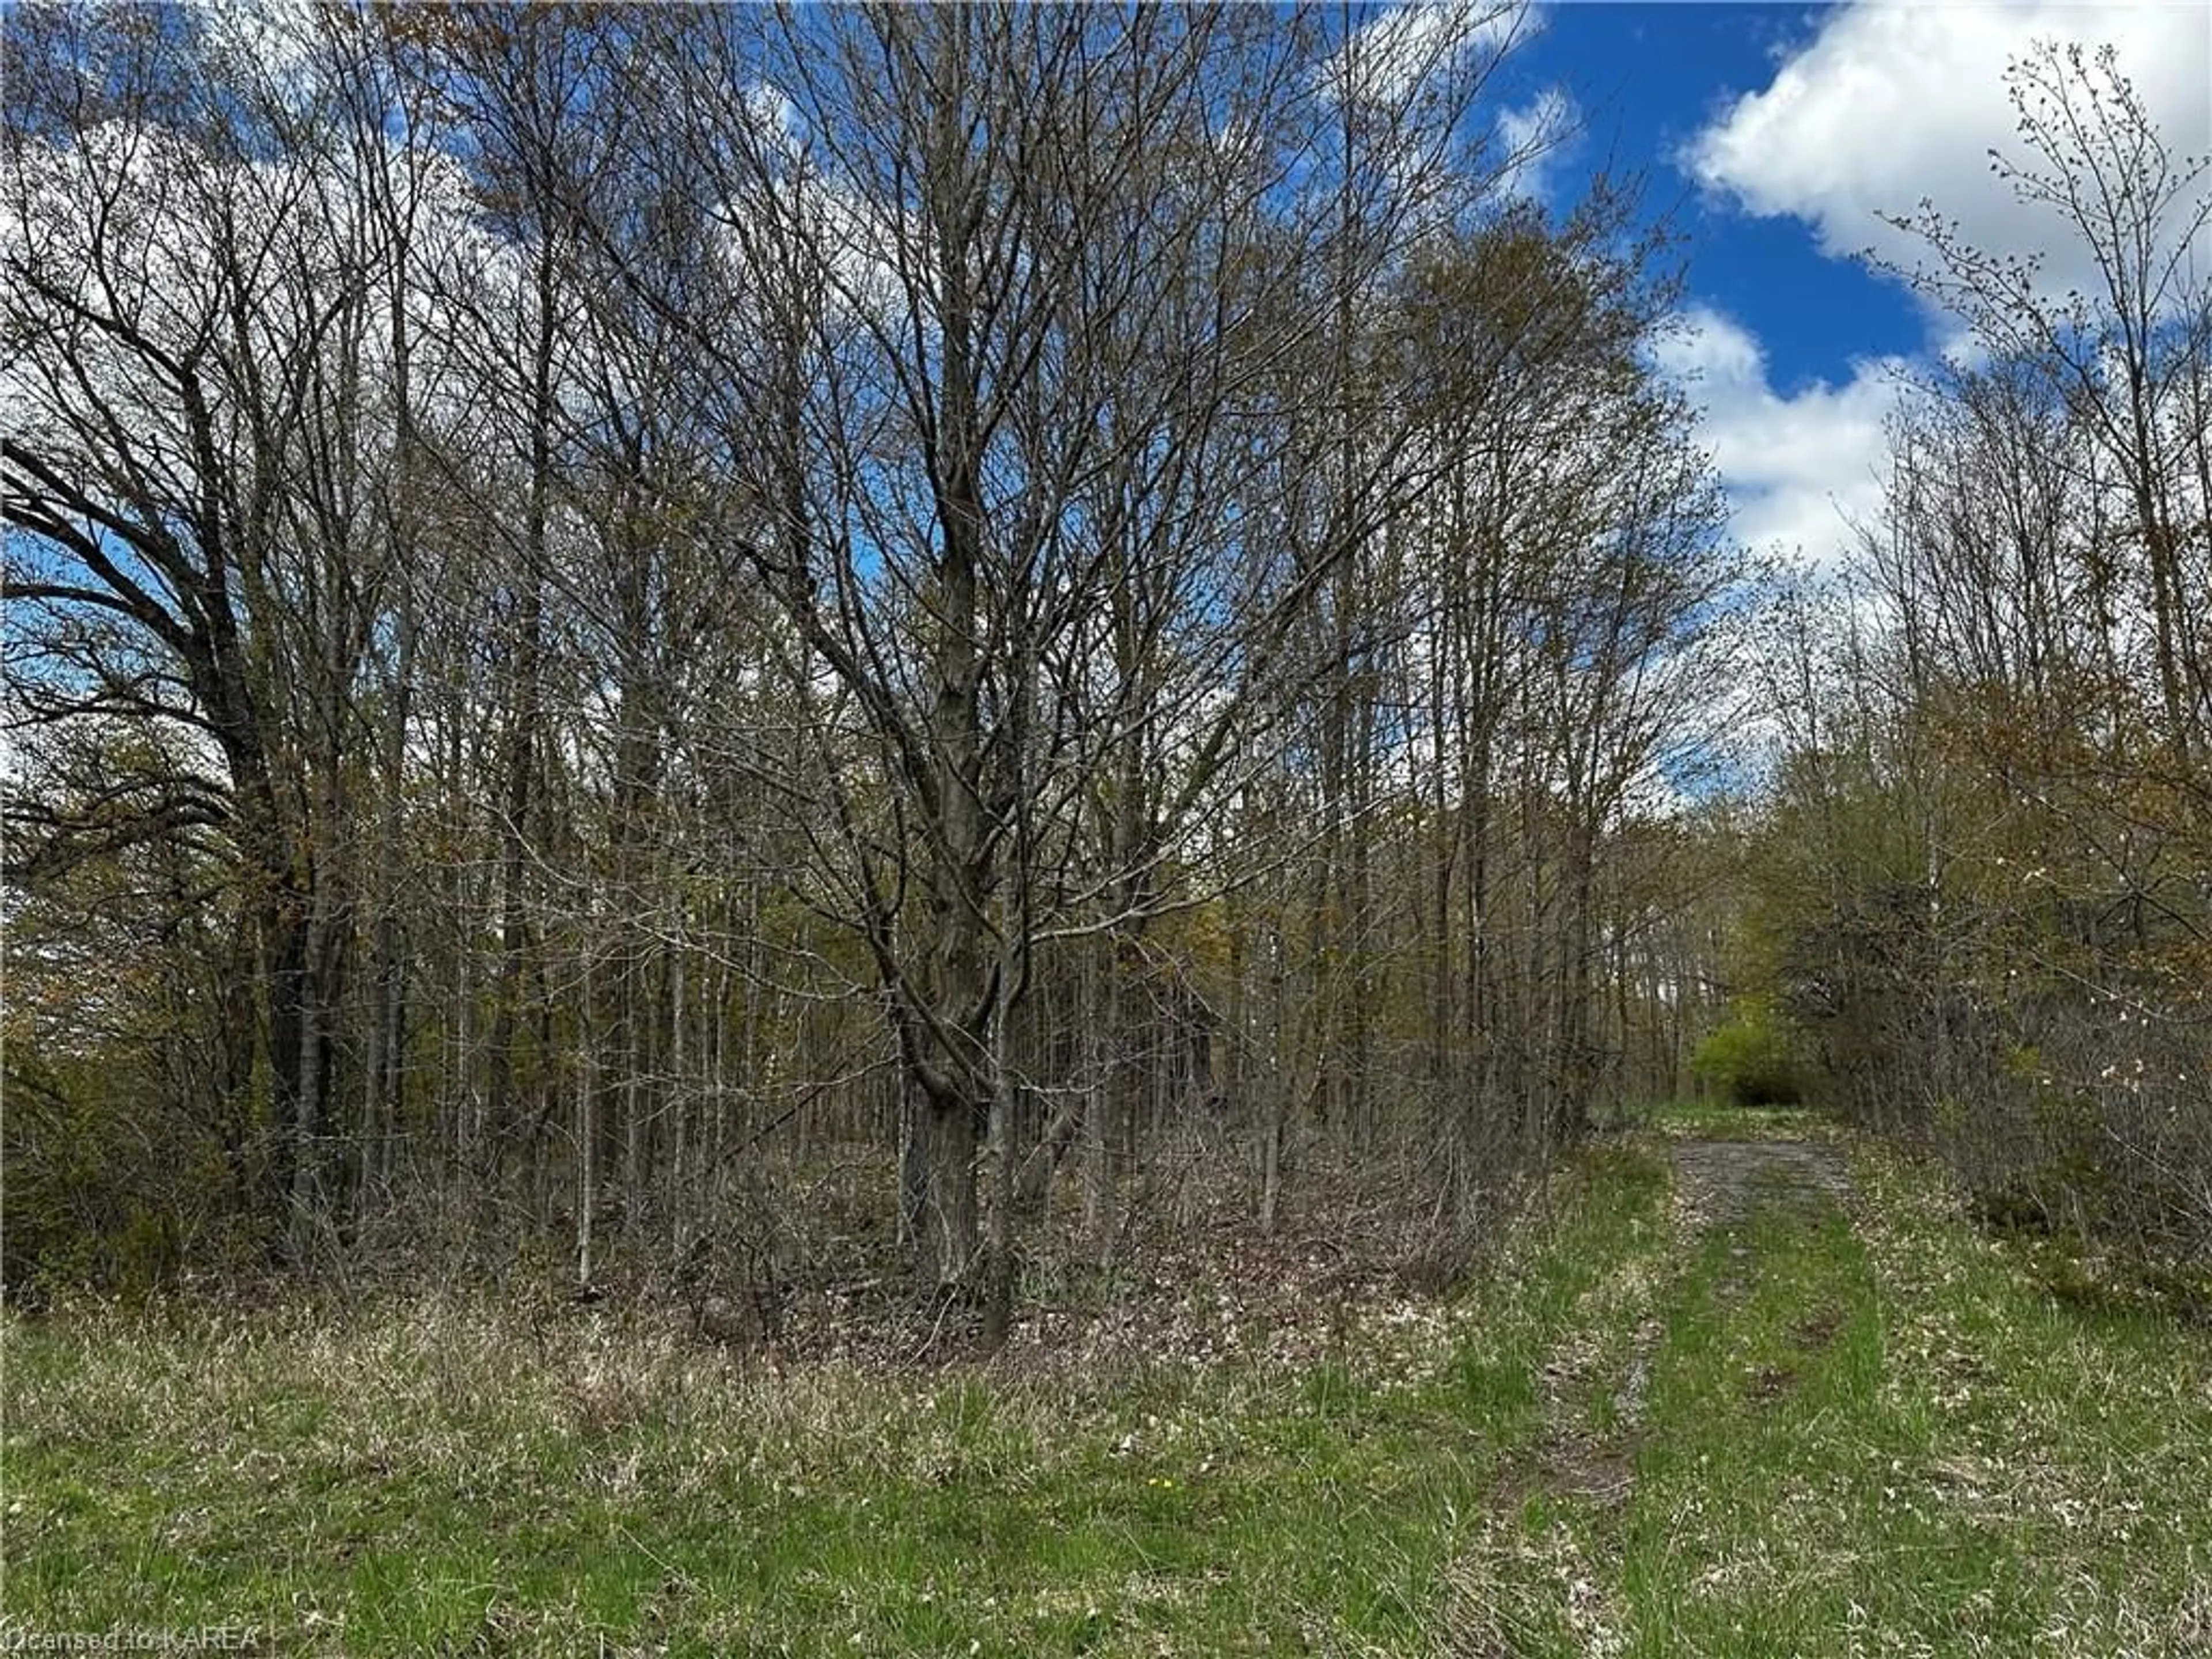 Forest view for LOT 3 Jamieson Rd, Harrowsmith Ontario K0H 1V0